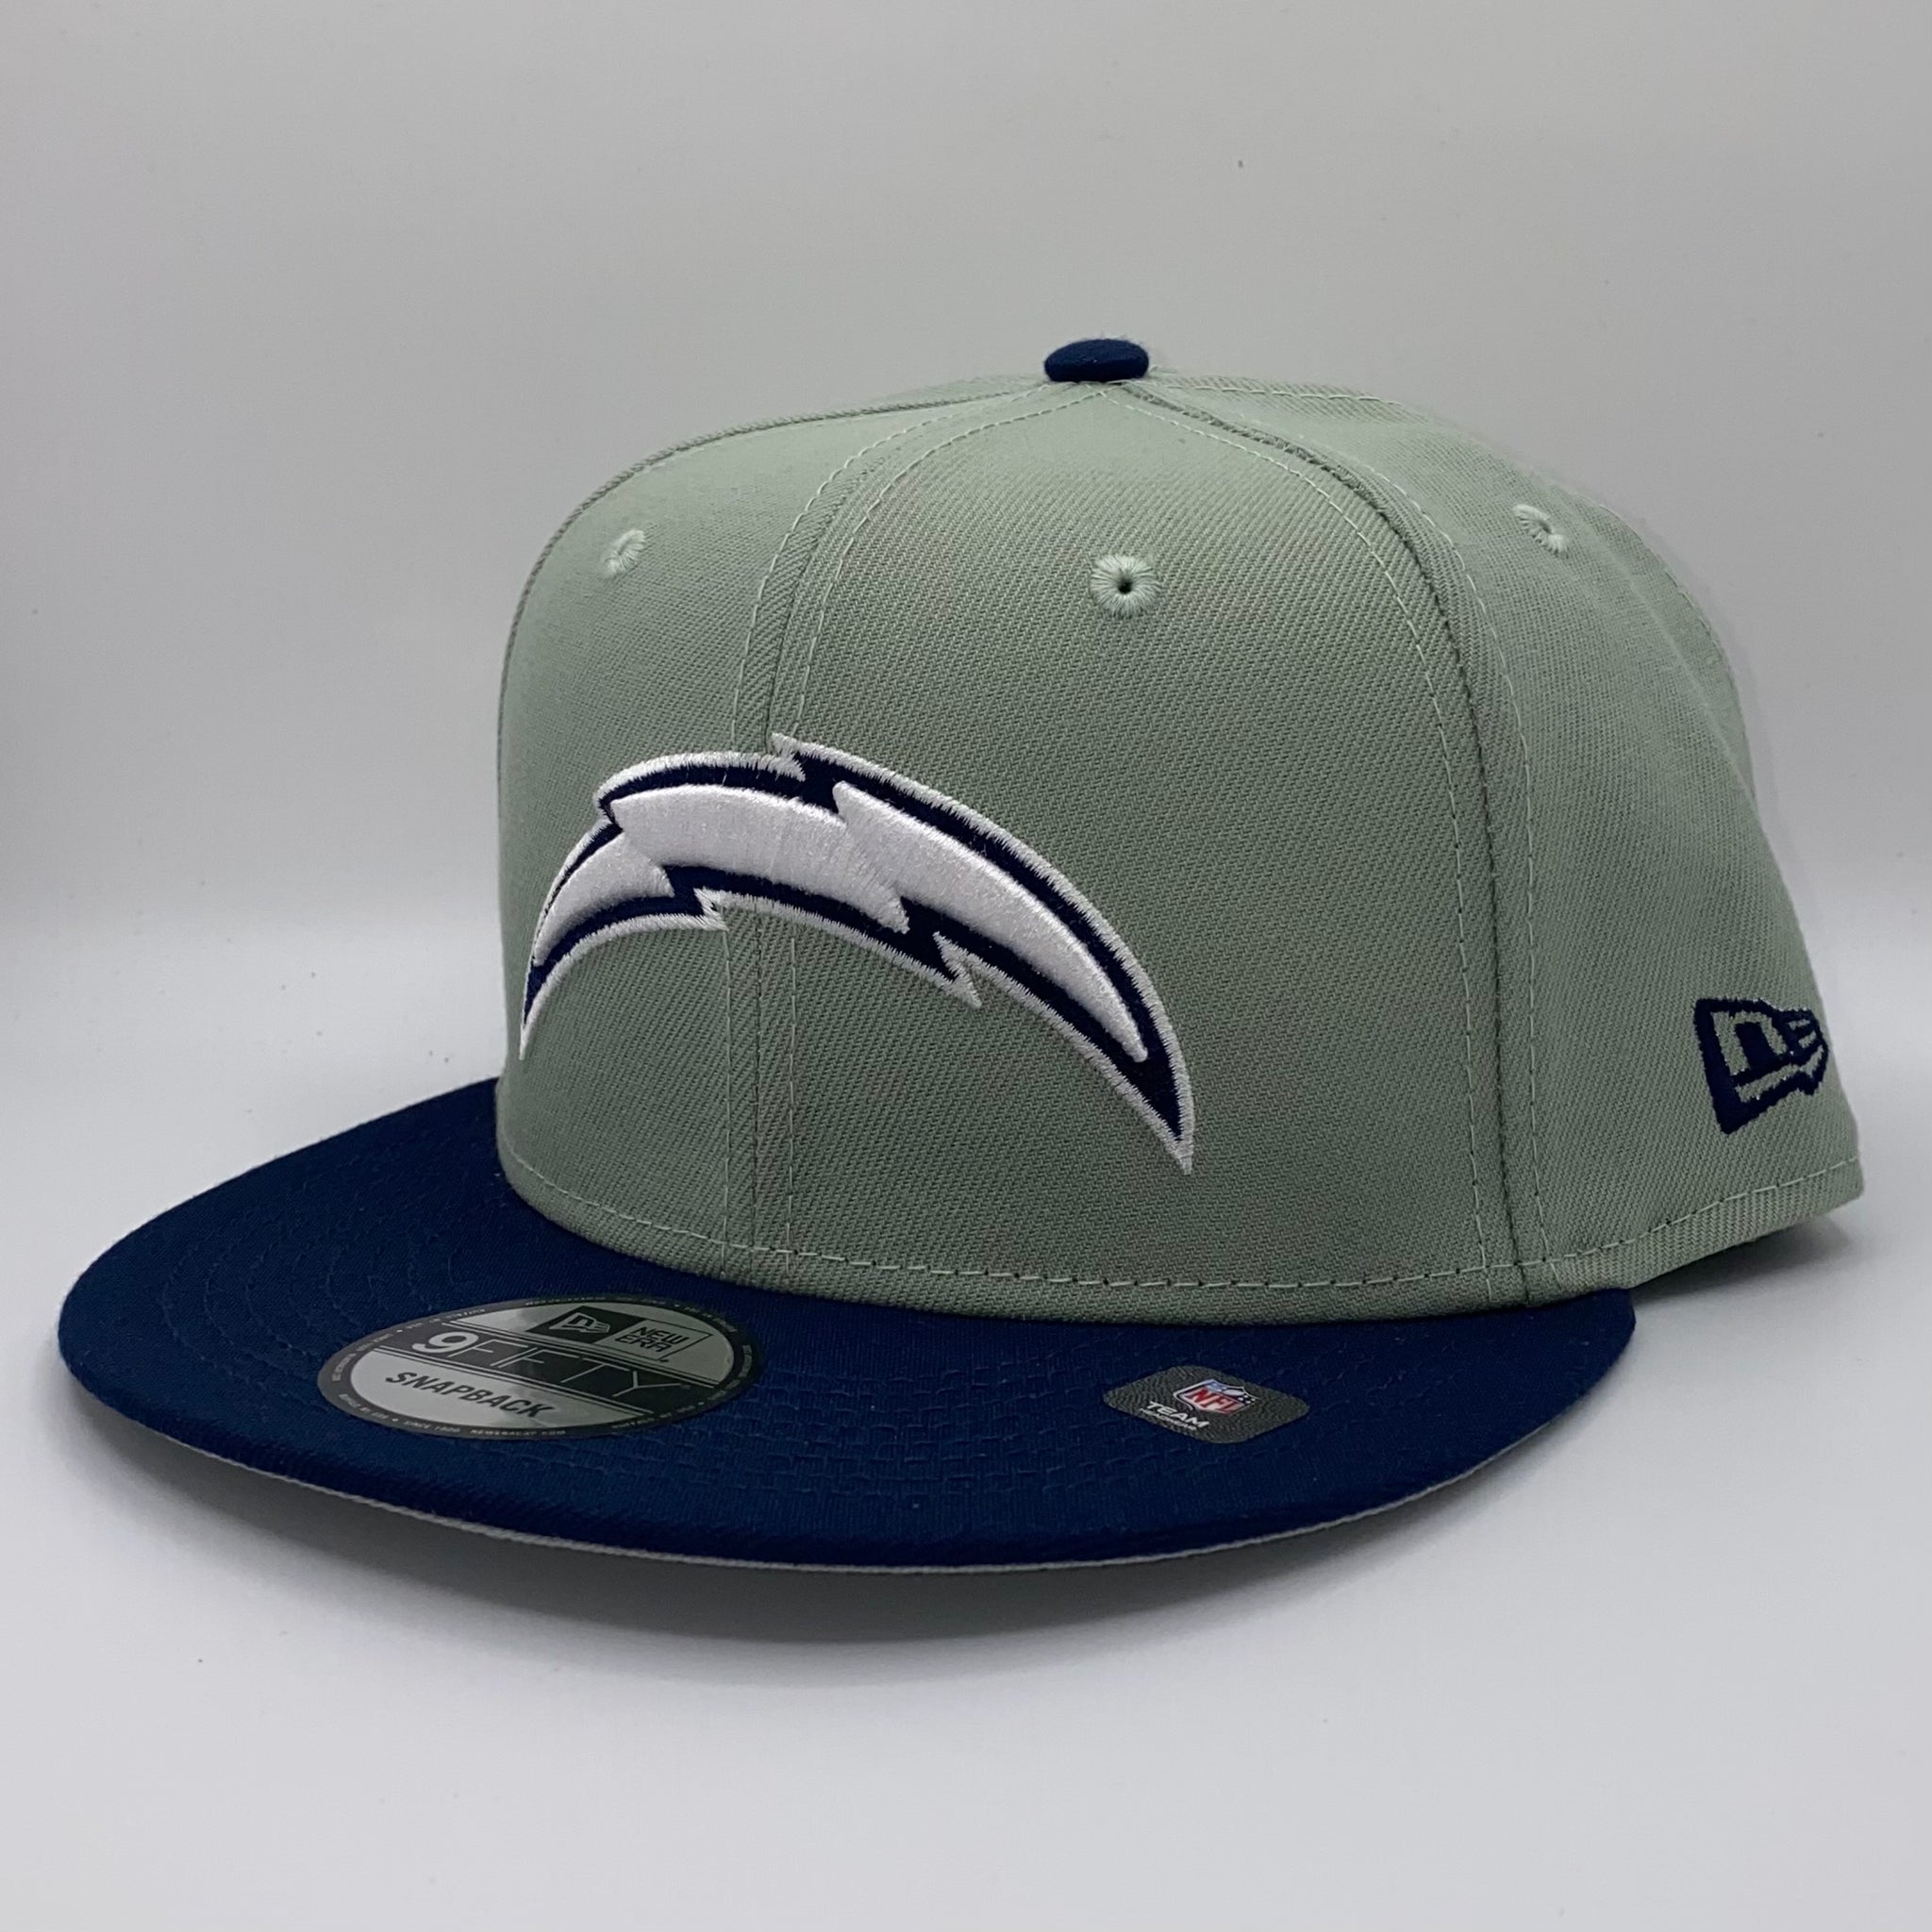 Los Angeles Chargers New Era 2Tone Color Pack 9FIFTY Snapback Hat - Navy/Cardinals